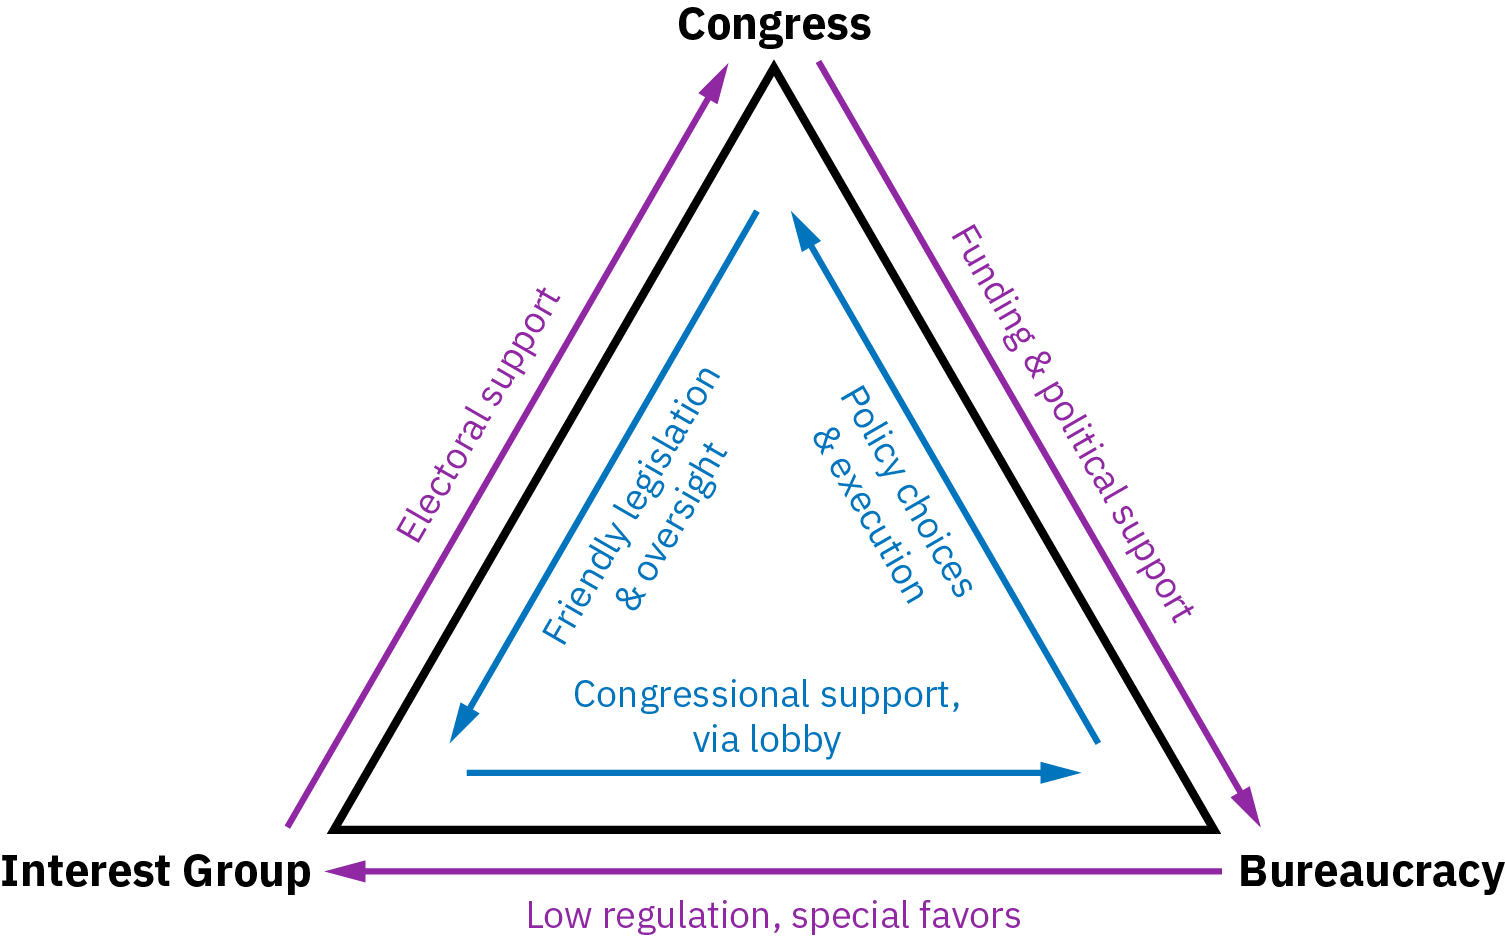 A figure of a triangle shows the interdependent relationship between Congress, the bureaucracy, and interest groups. Congress provides funding and political support for the bureaucracy, which in turn helps Congress make and execute policies. Interest groups lobby Congress to support the bureaucracy, and in return the breaucracy provides low regulation and special favors to interest groups. Interest groups provide electoral support to Congress, which in turn produces legislation and oversight friendly to those interest groups.